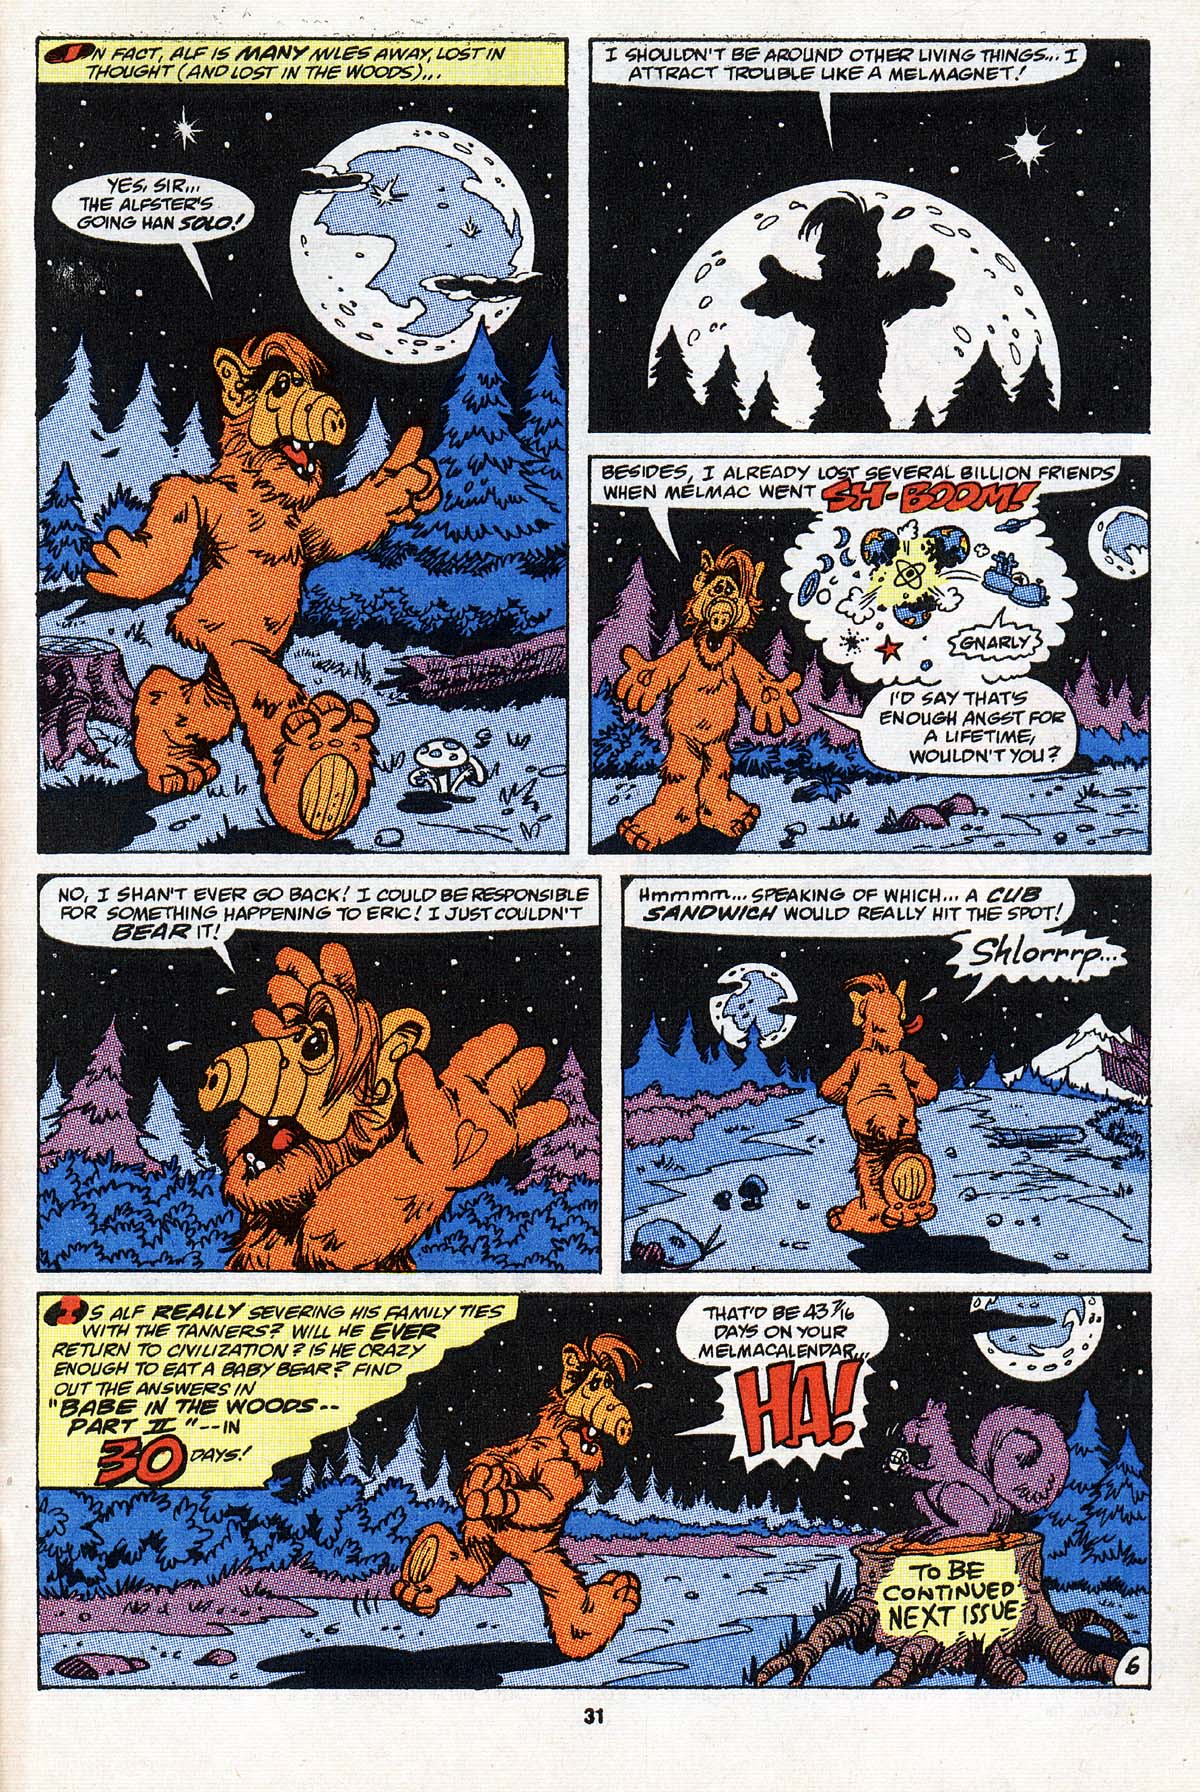 Read online ALF comic -  Issue #20 - 23